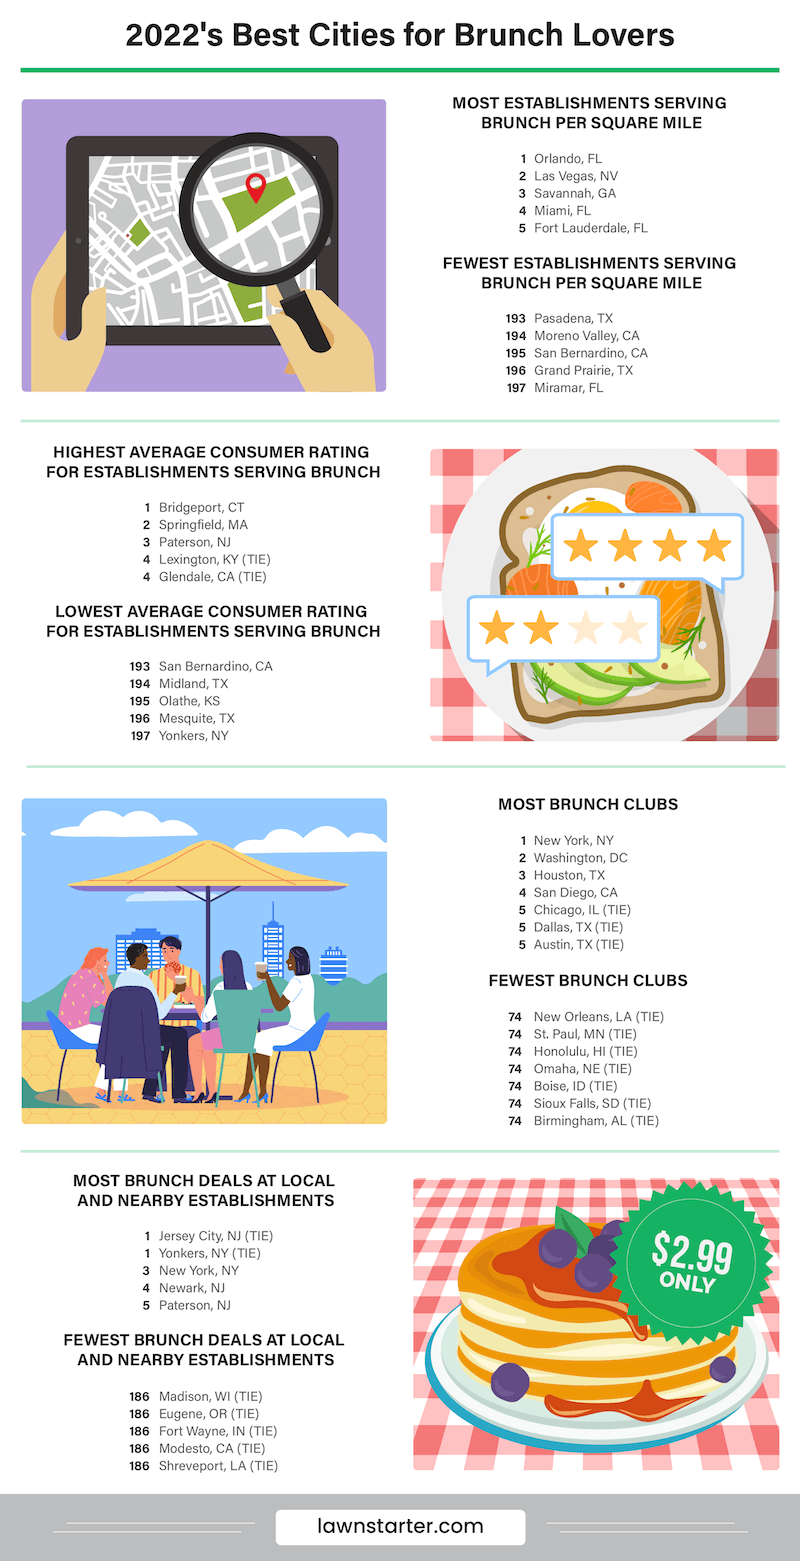 Infographic showing the best cities for brunch lovers, a ranking based on access to brunch spots, consumer ratings, brunch deals, and local demand